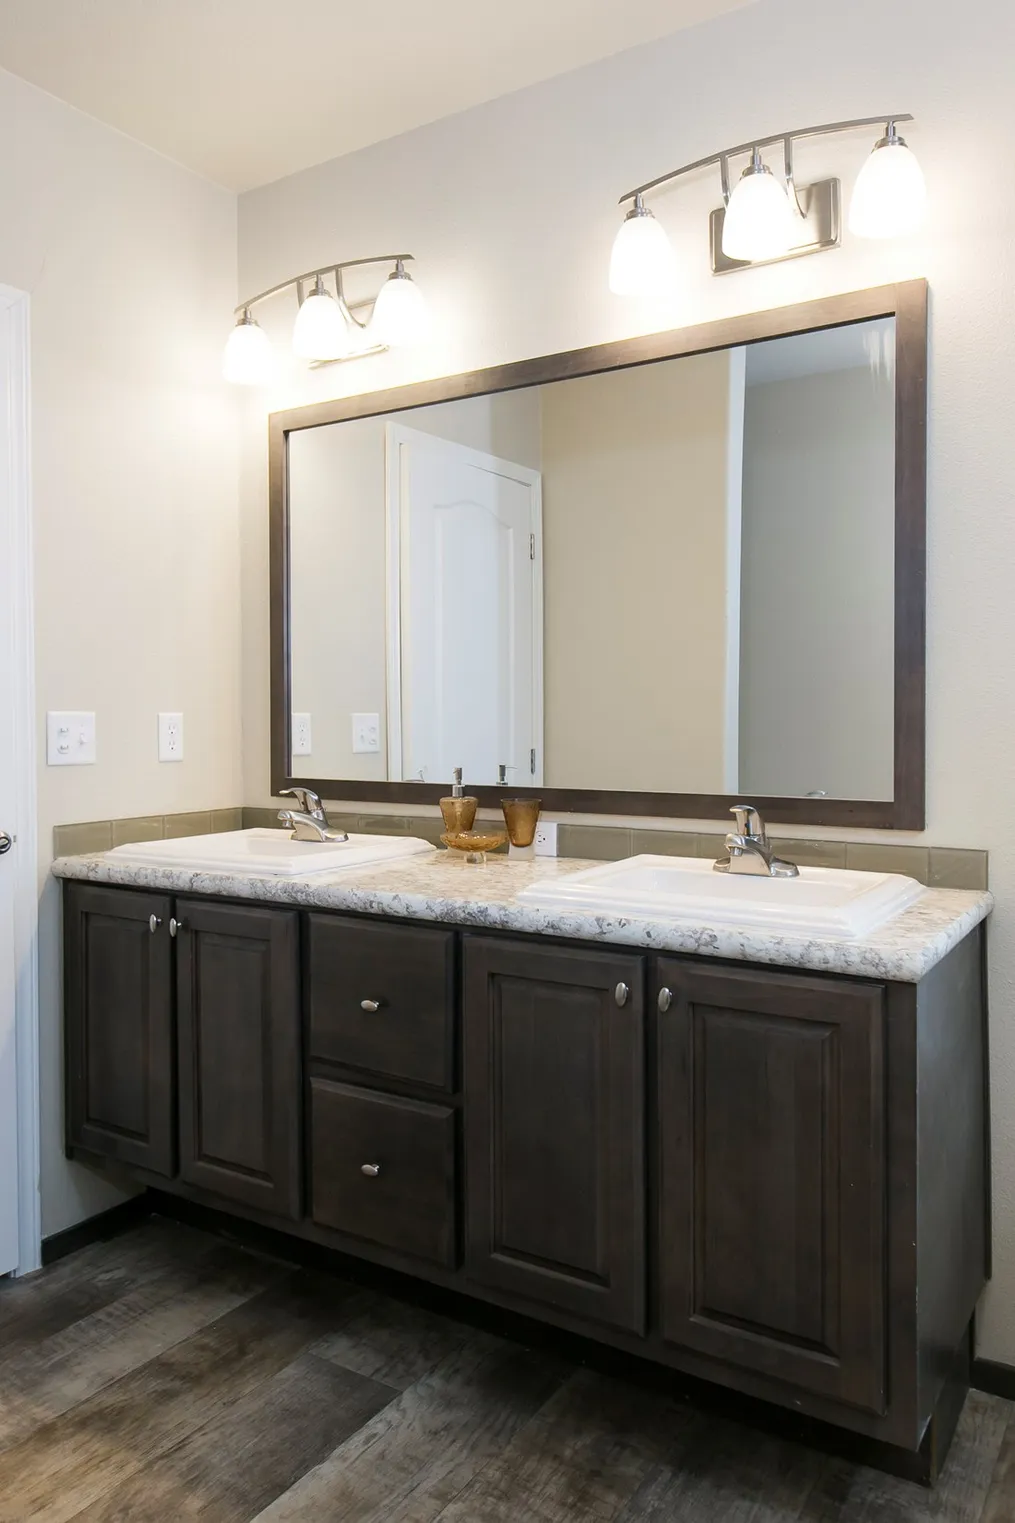 The 2023 COLUMBIA RIVER Primary Bathroom. This Manufactured Mobile Home features 3 bedrooms and 2 baths.